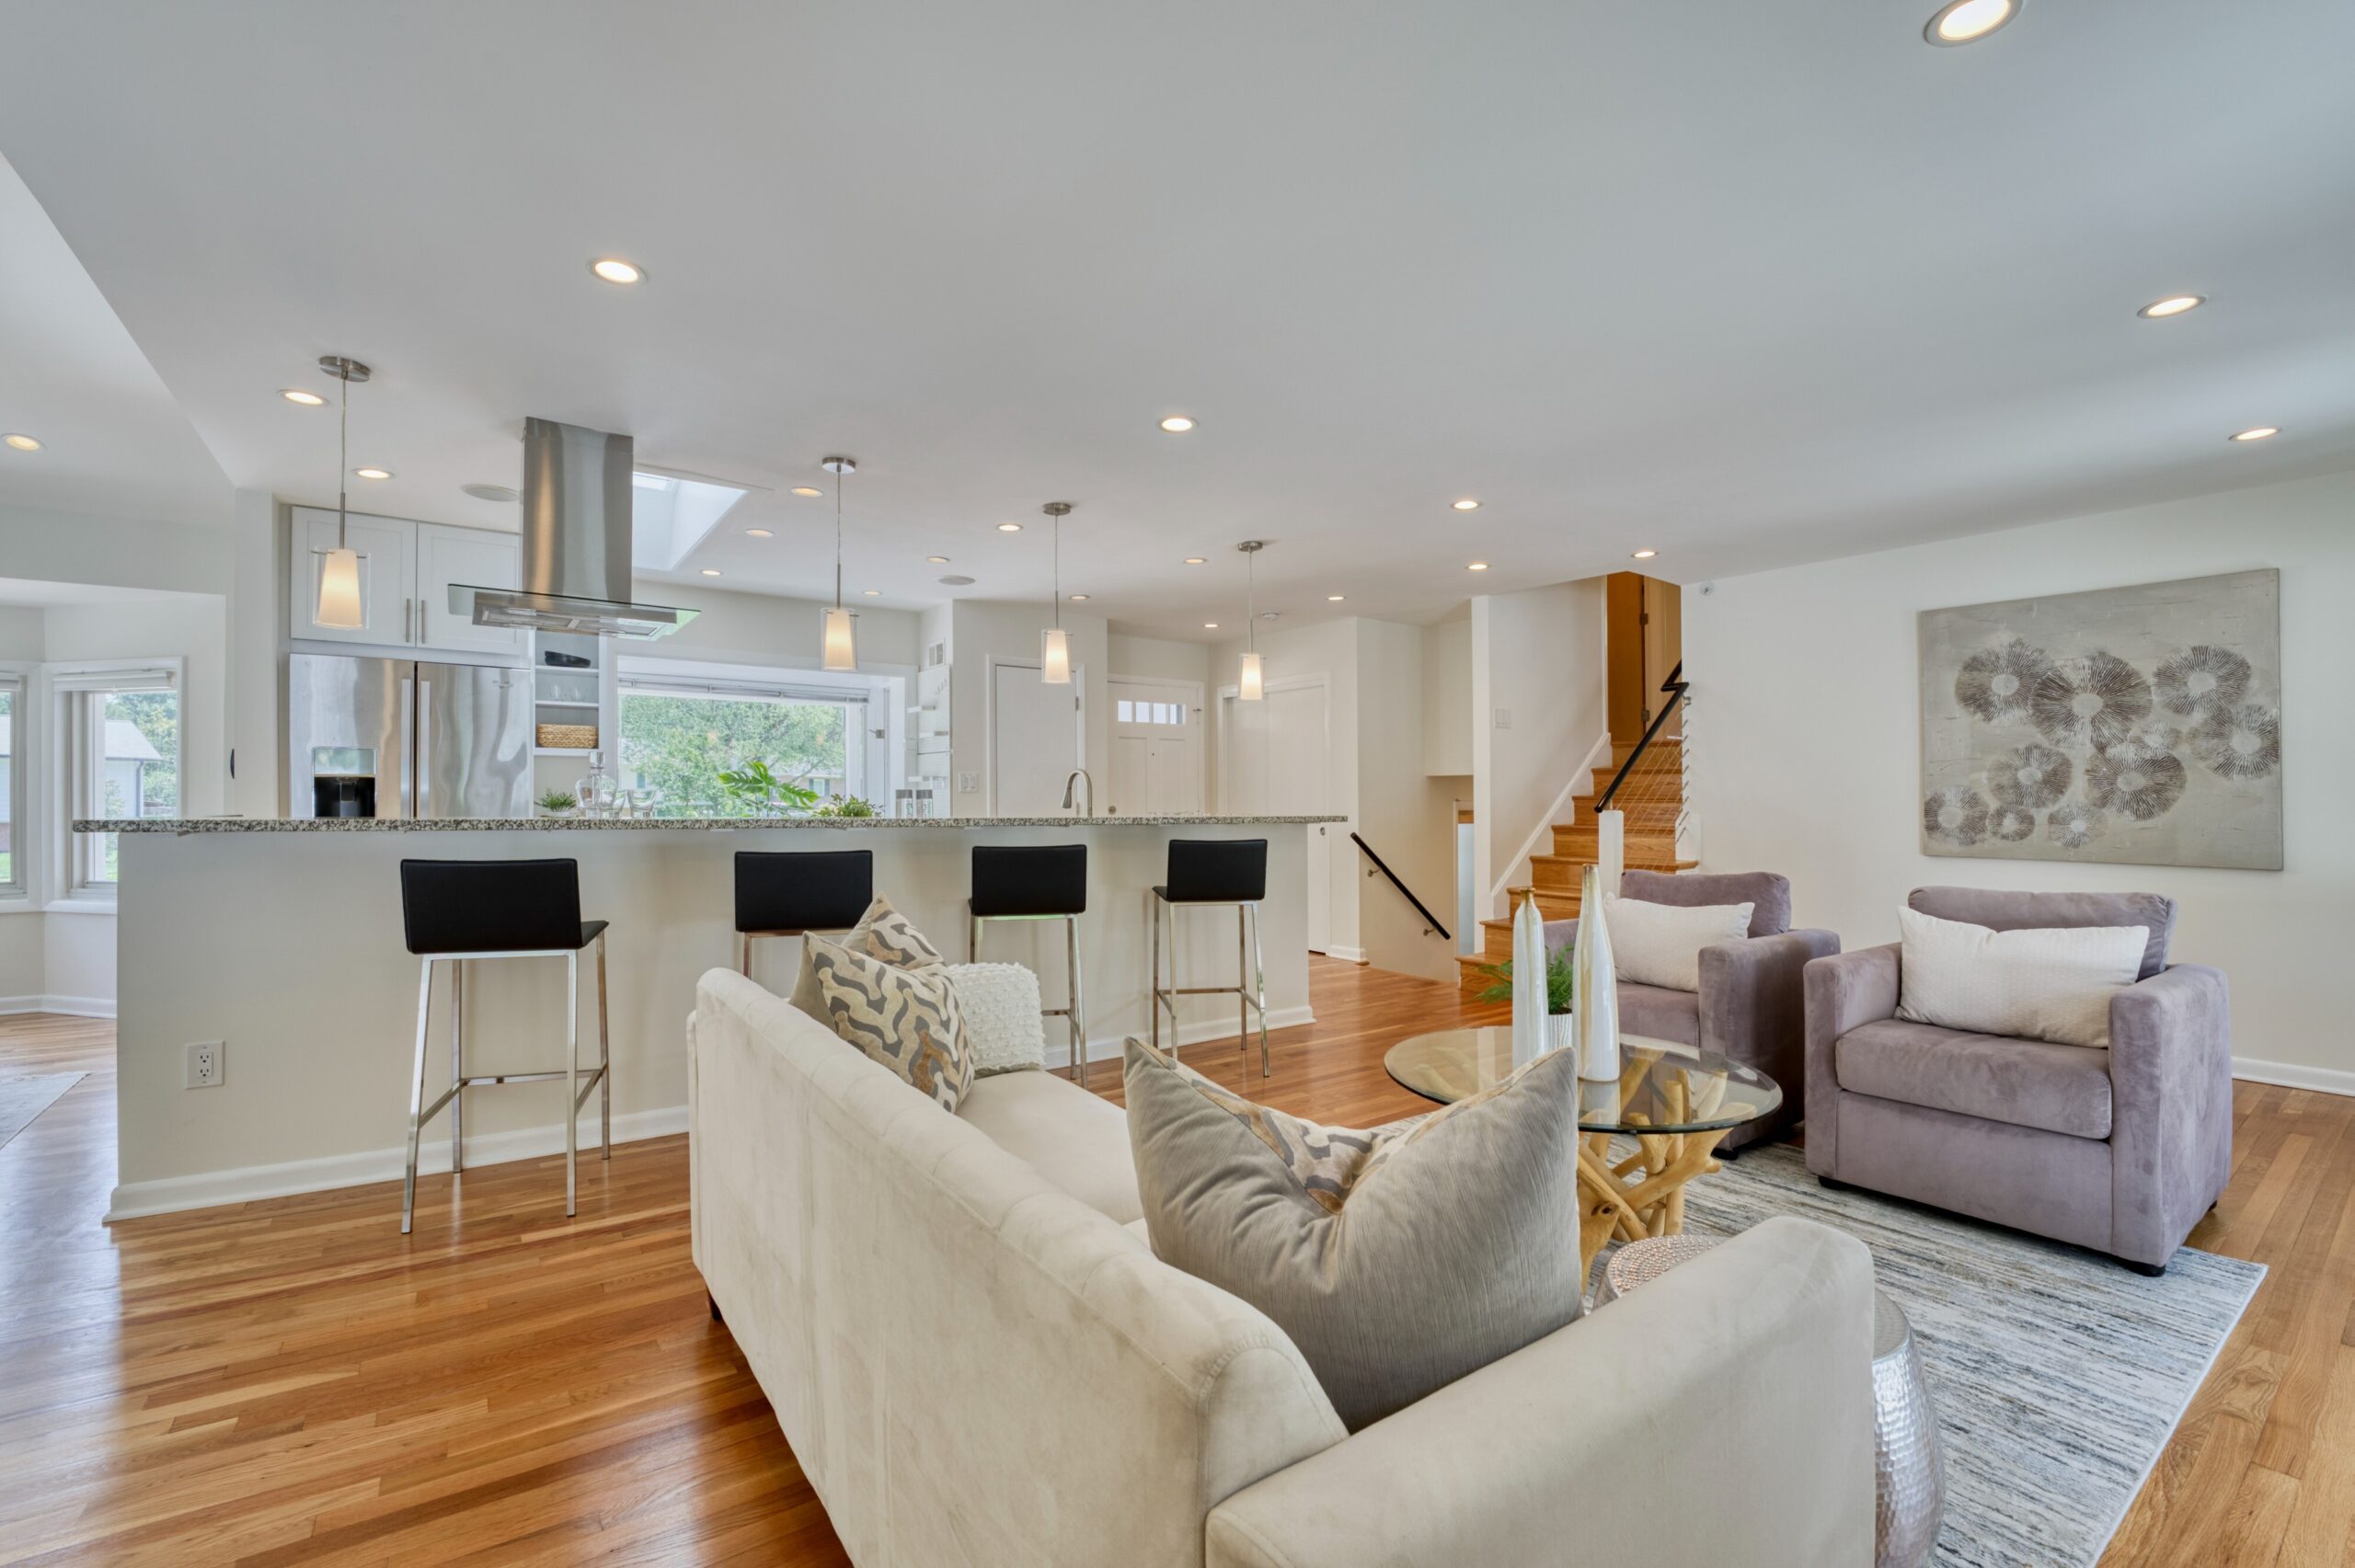 Professional interior photo of 8320 Fort Hunt Rd, Alexandria - showing the open kitchen/living room with huge center island and beautiful modern staging